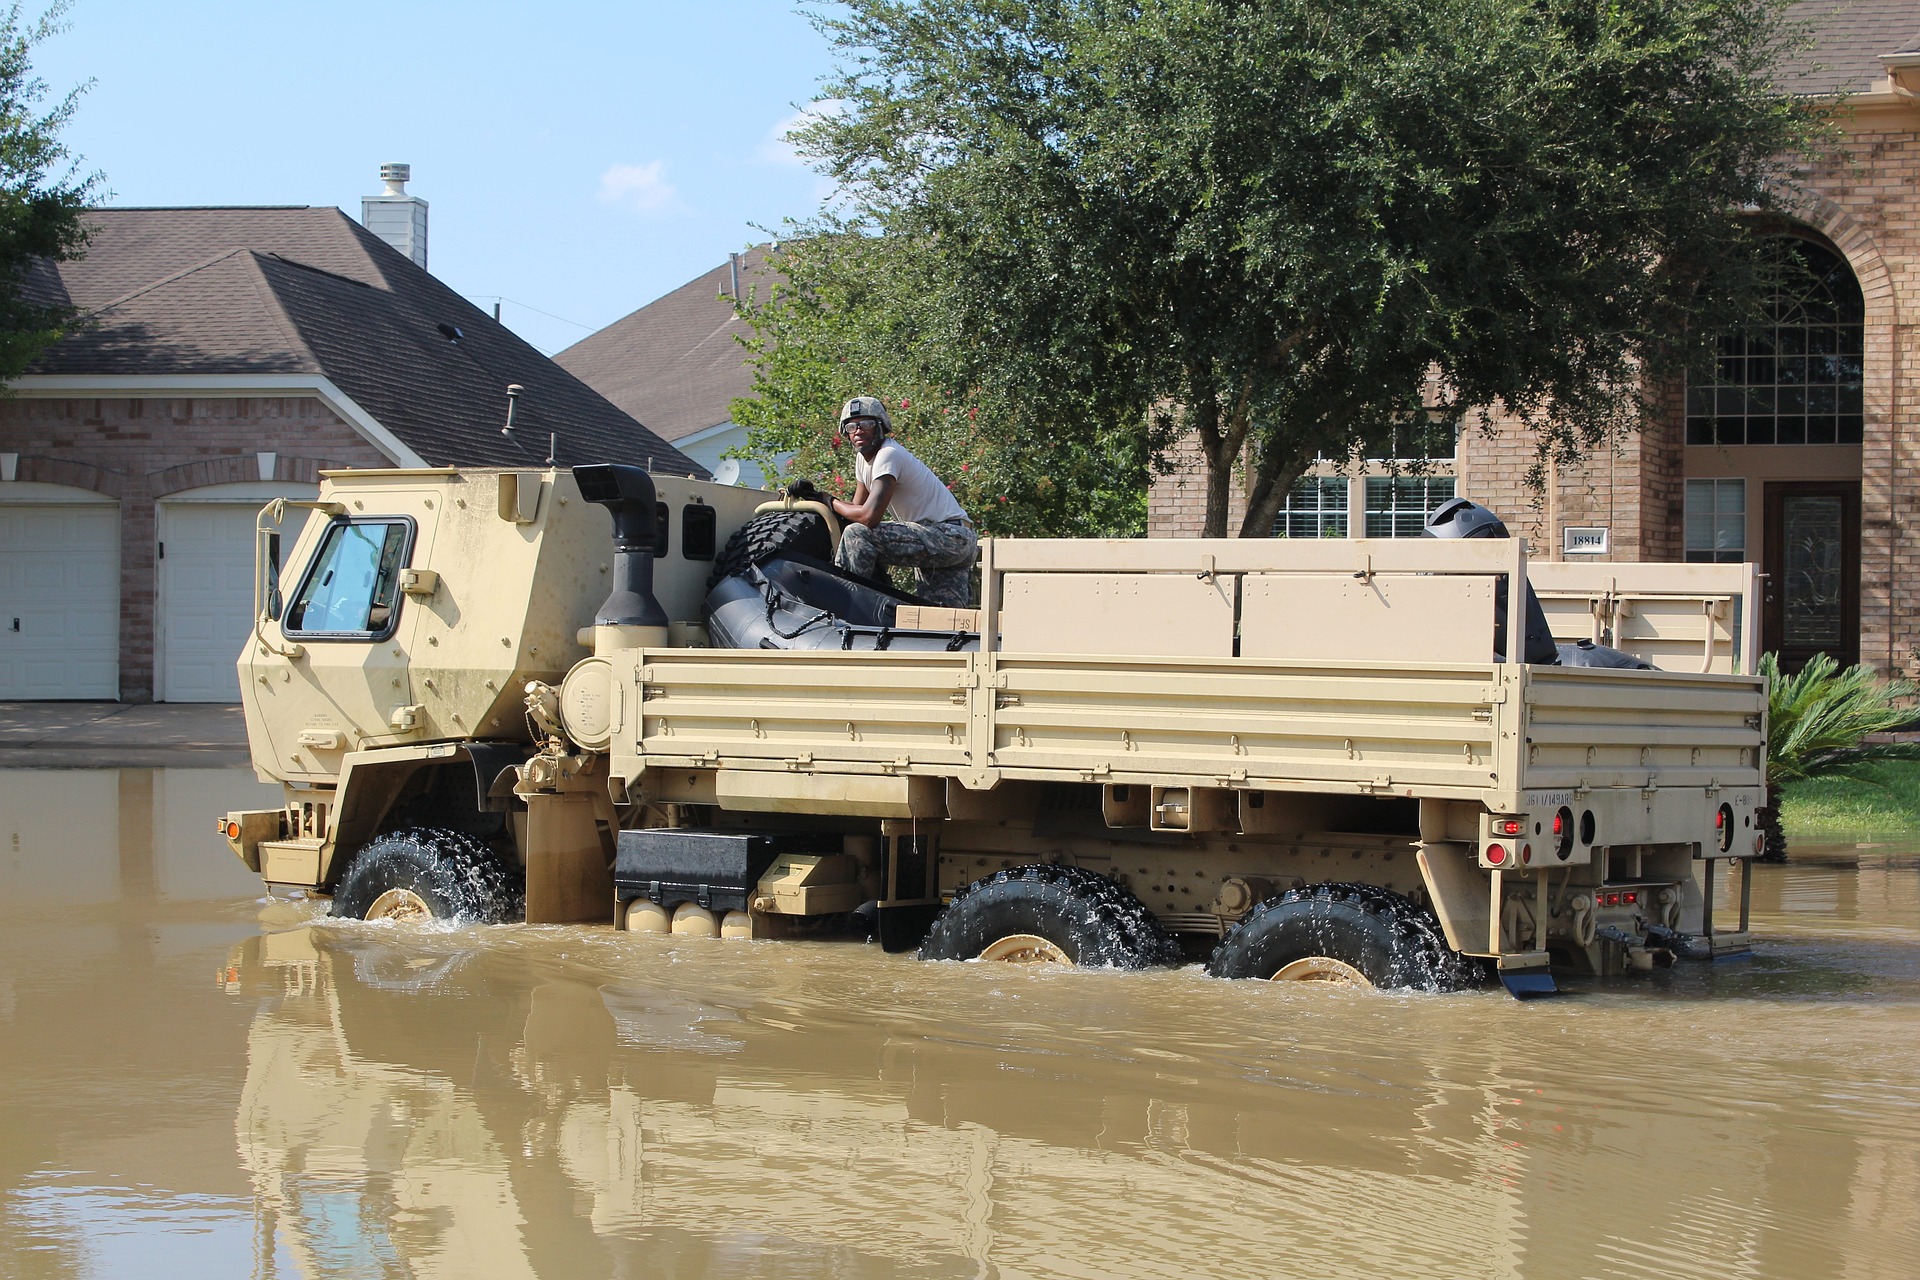 A vehicle makes its way through a neighborhood in the aftermath of Hurricane Harvey, which caused flooding in the region in August 2017.